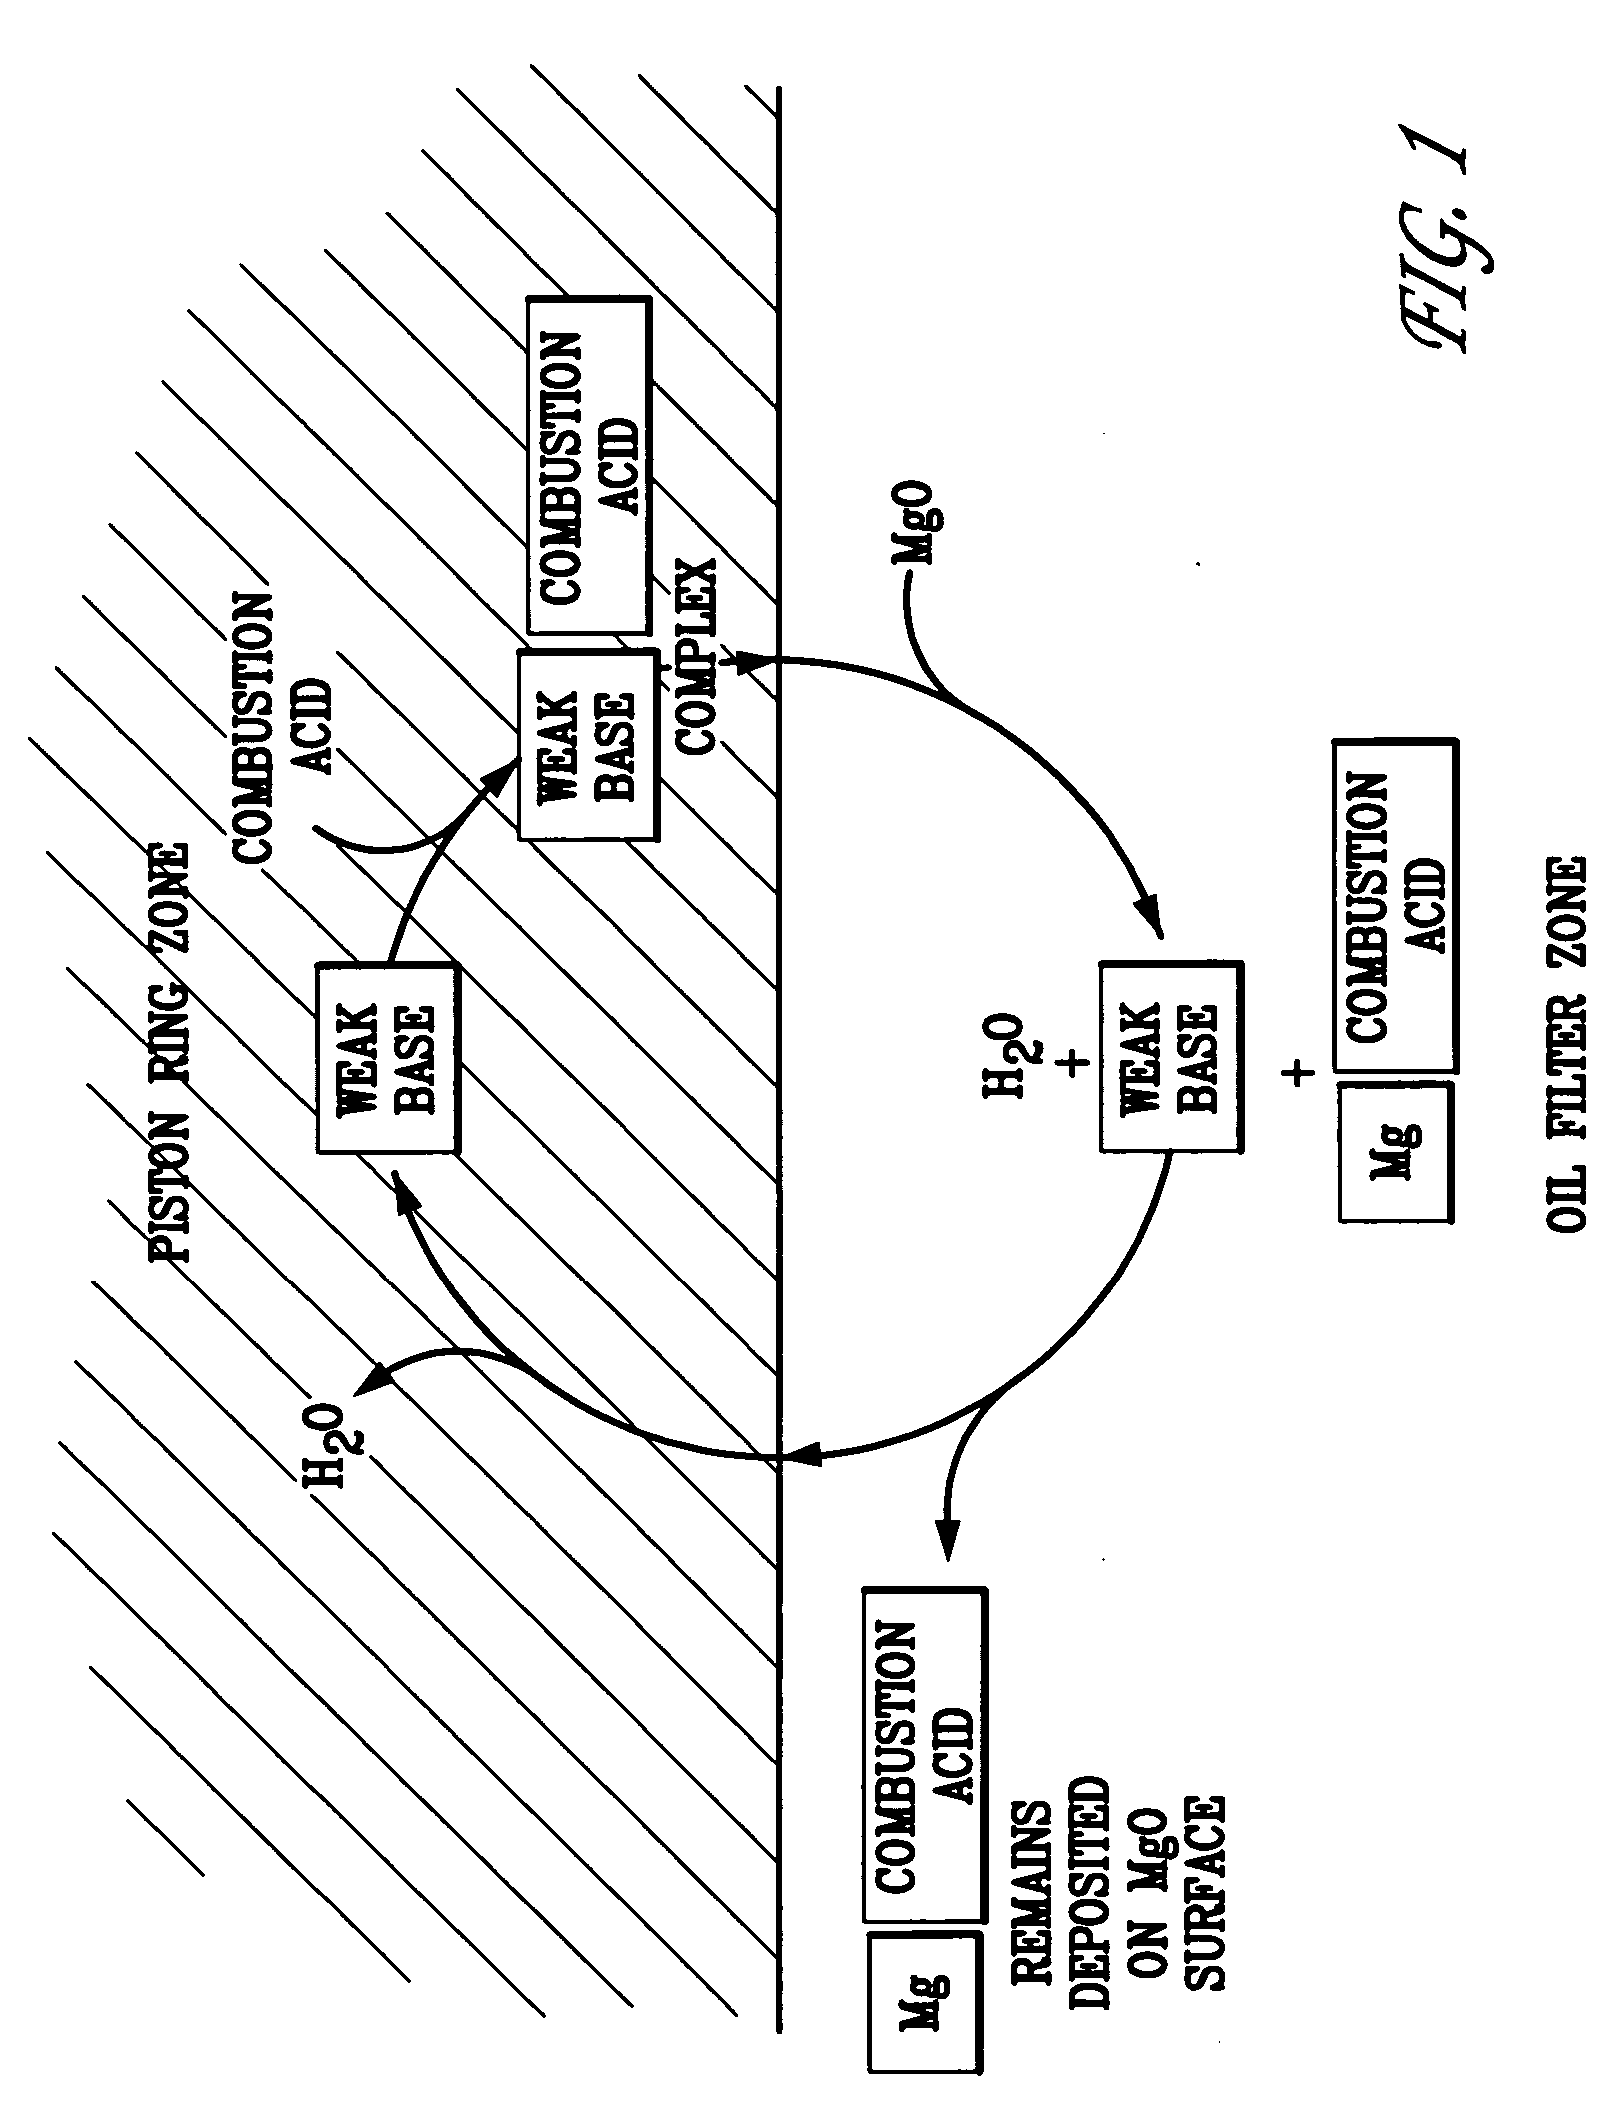 Materials, filters, and systems for immobilizing combustion by-products and controlling lubricant viscosity